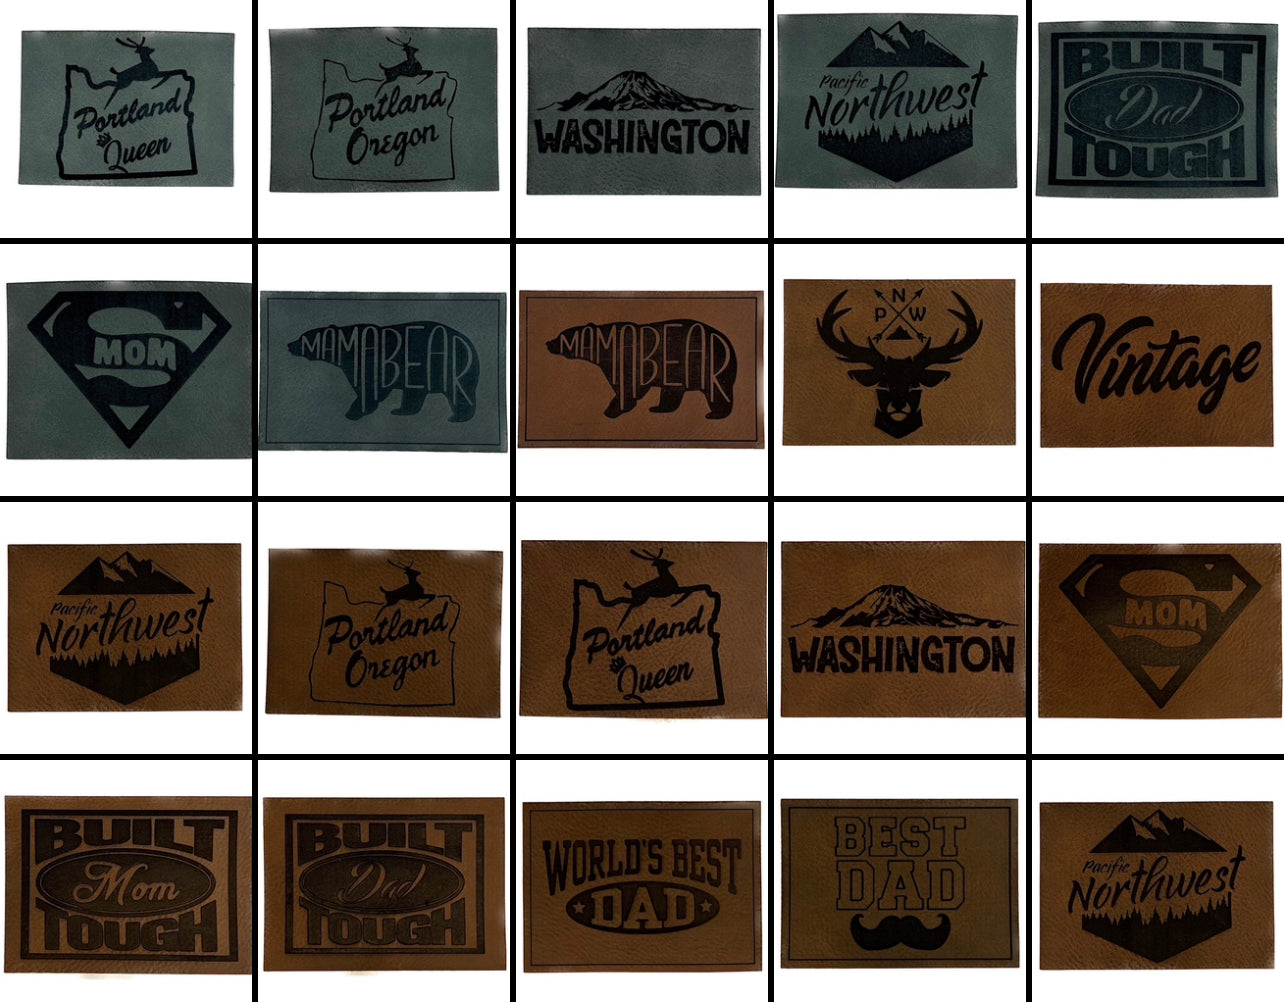 Custom Blank Genuine Leather Patches for Hats with Your Customized Ideas